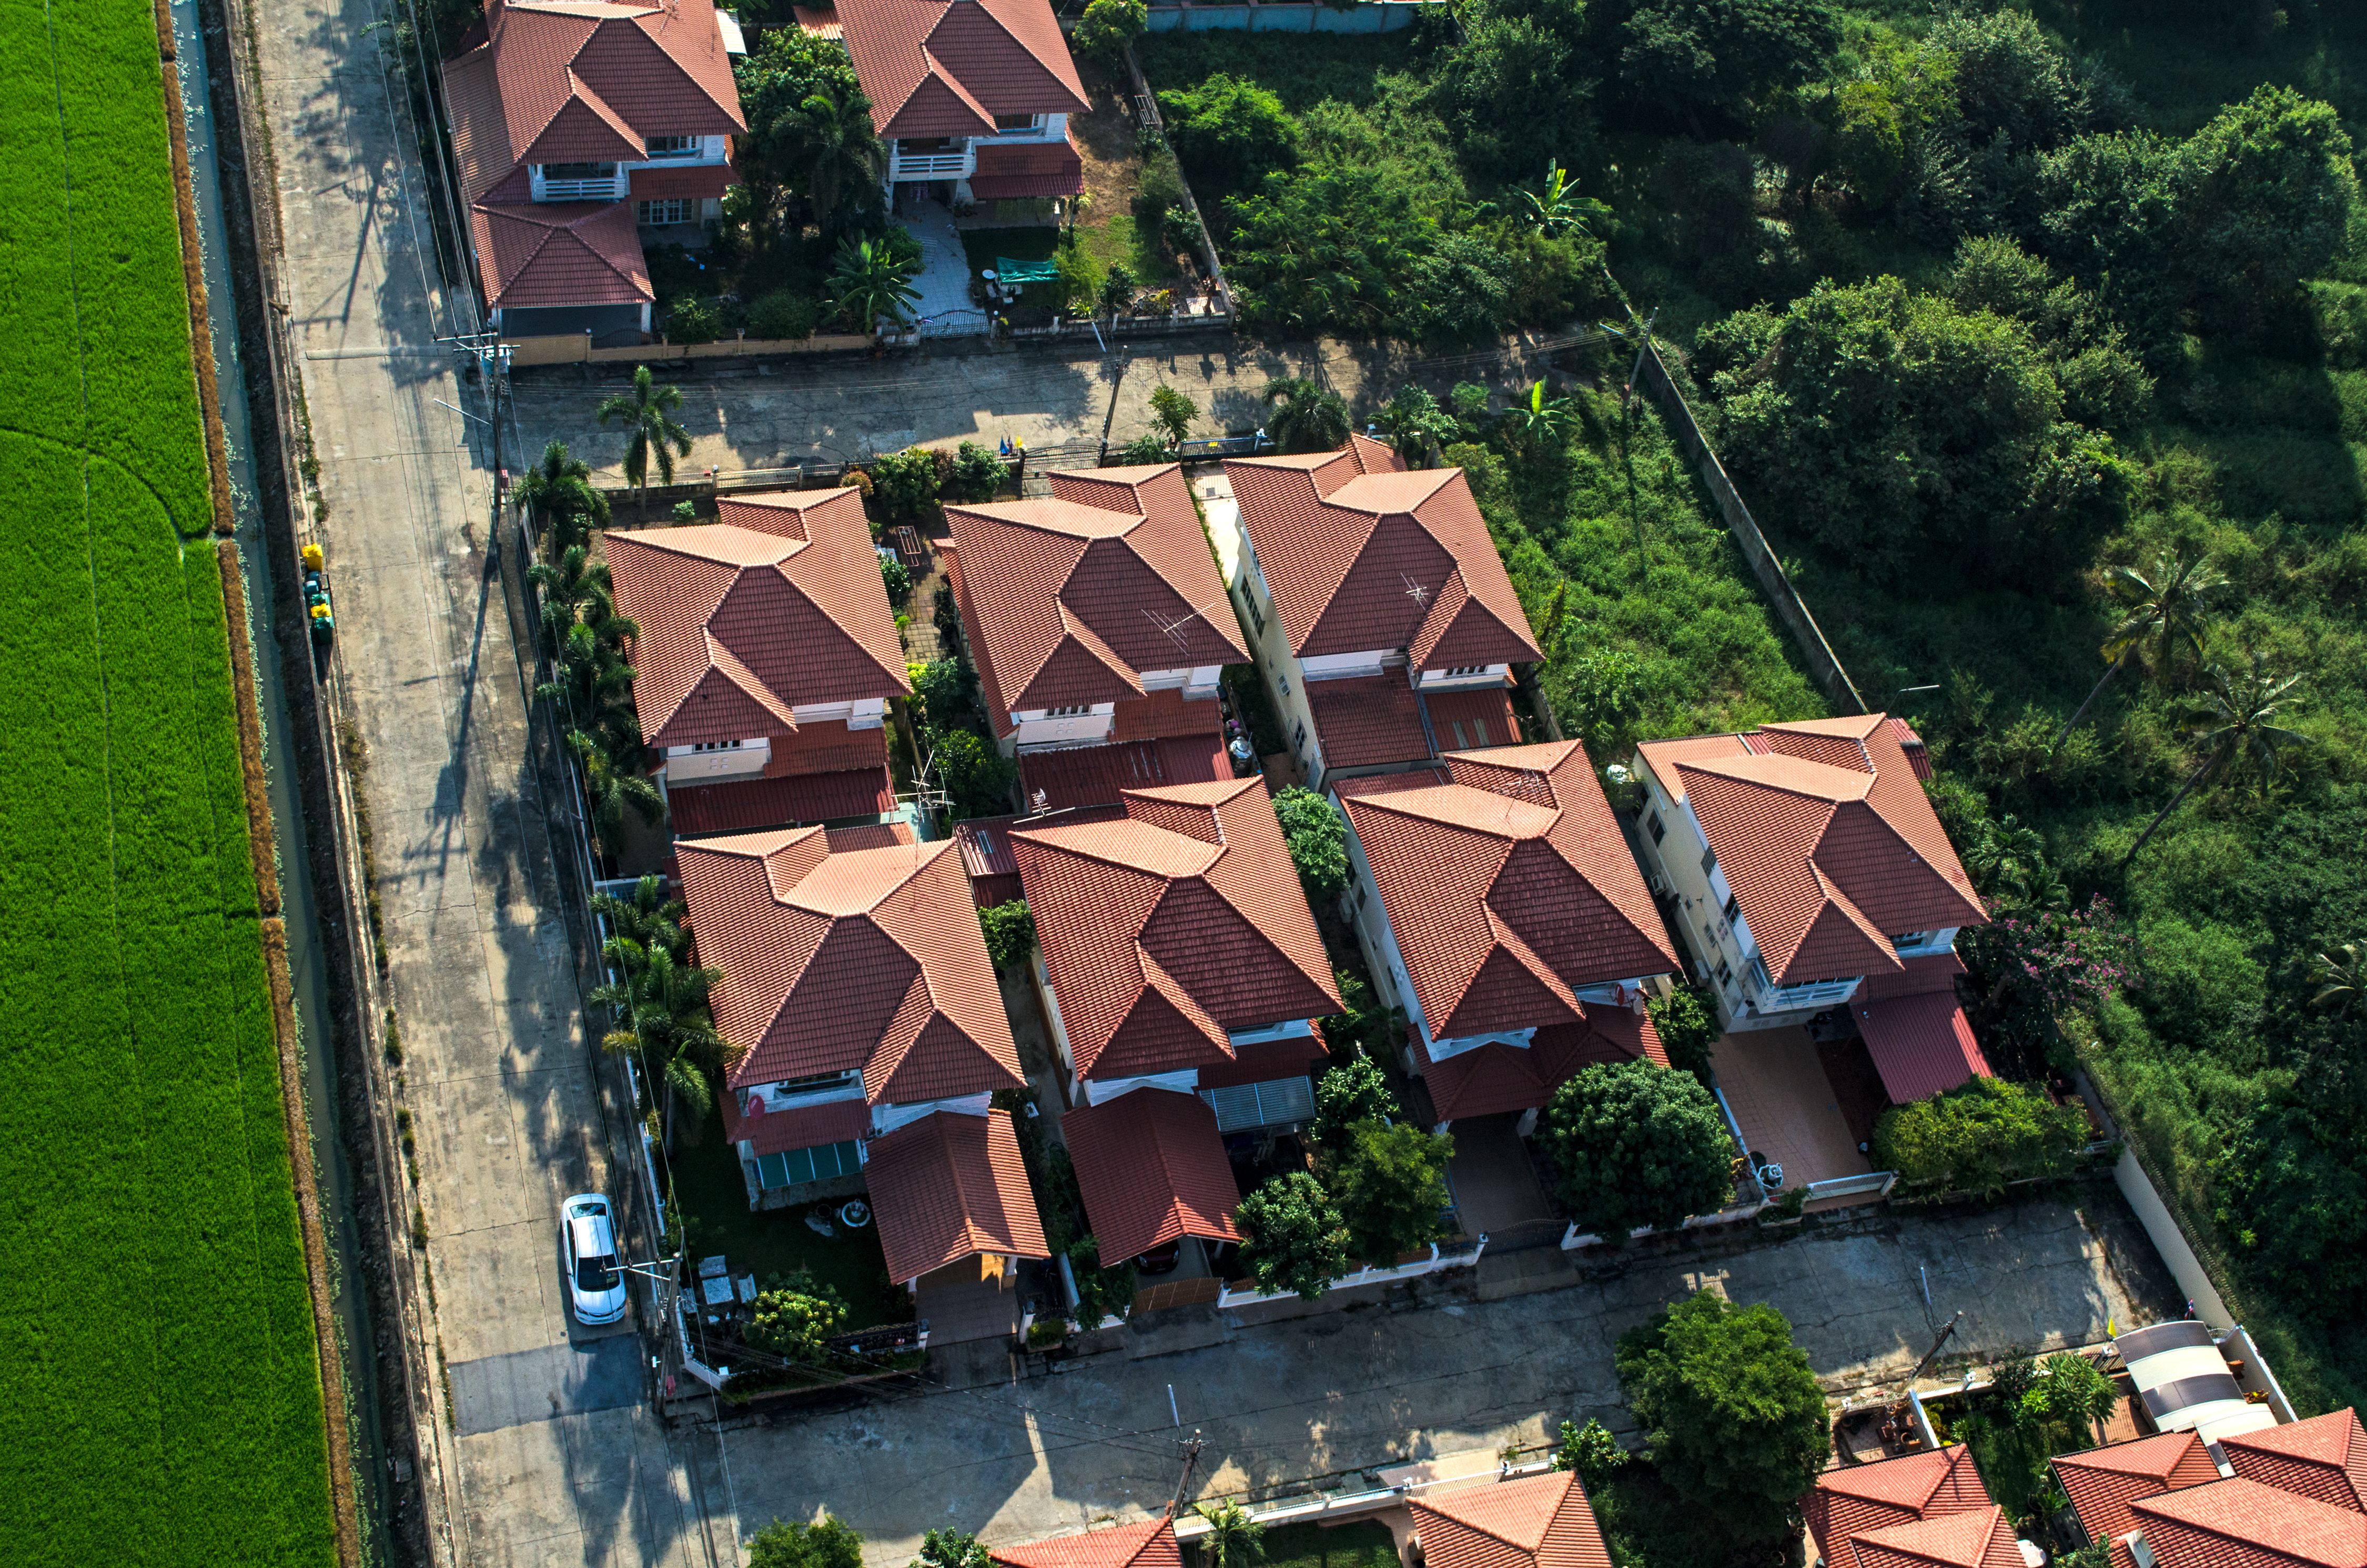 Red roofs in residential area housing, viewed from the air